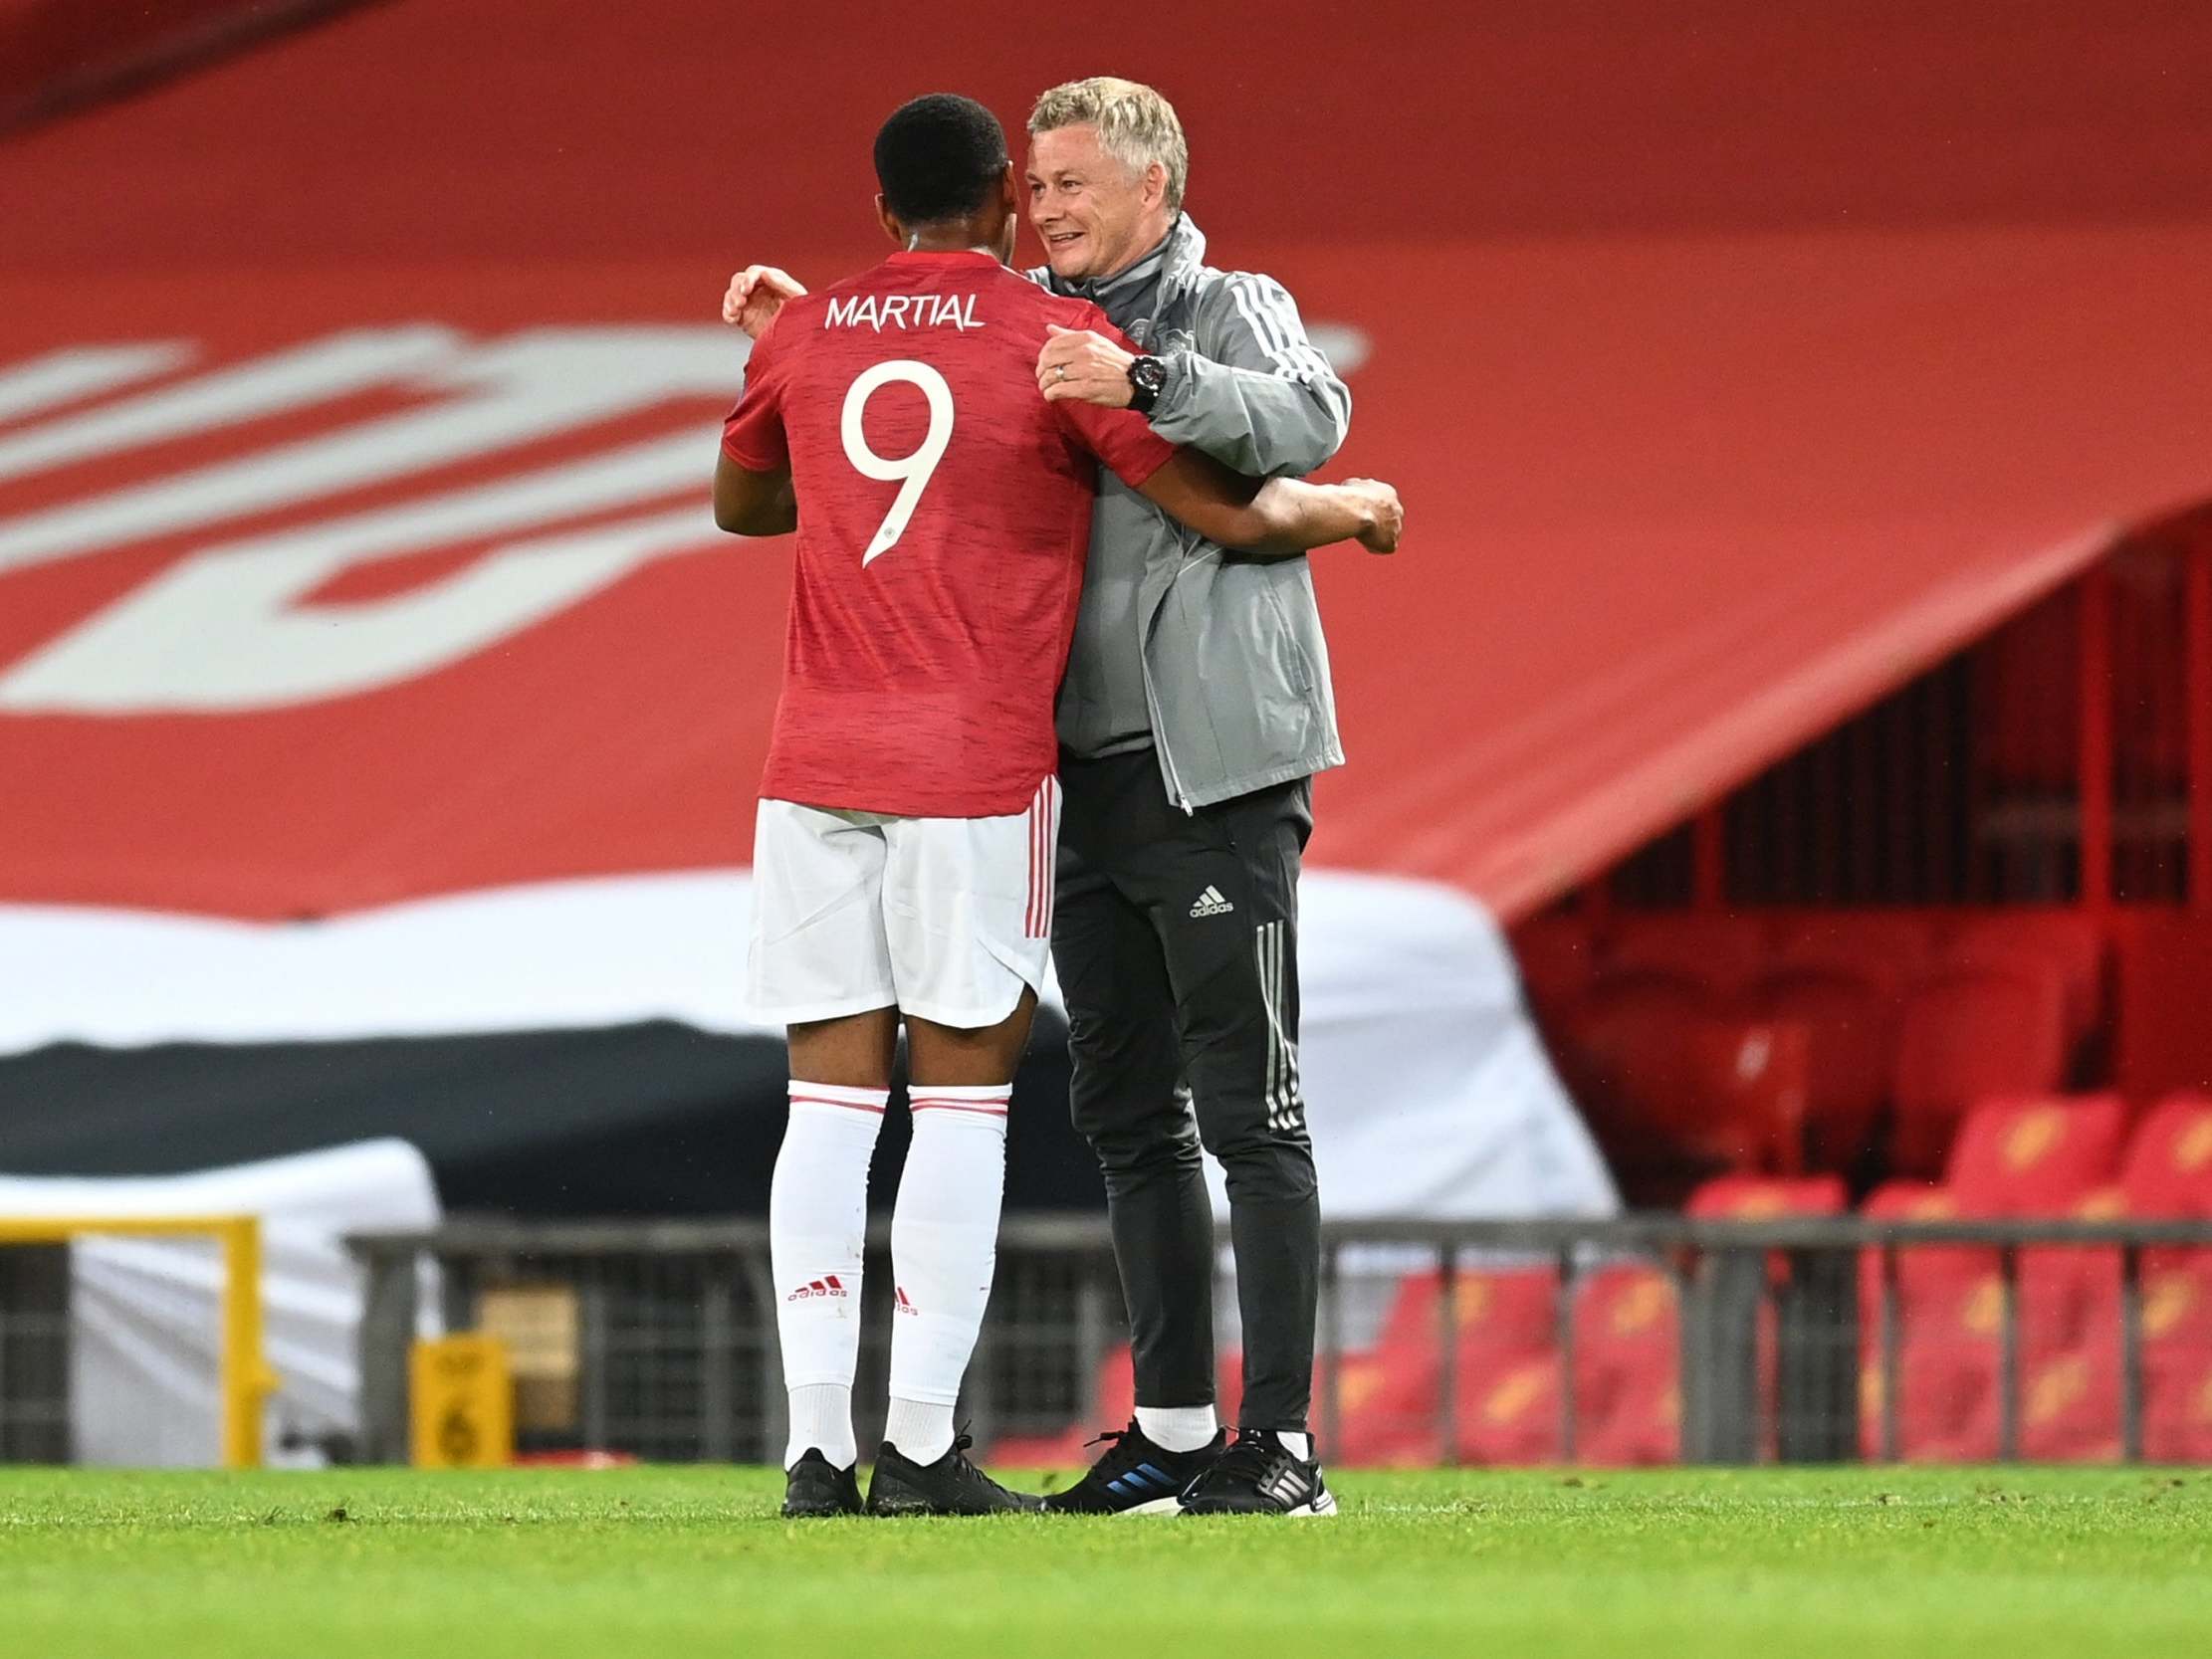 'Job done' for Ole Gunnar Solskjaer after Manchester United progress in Europa League